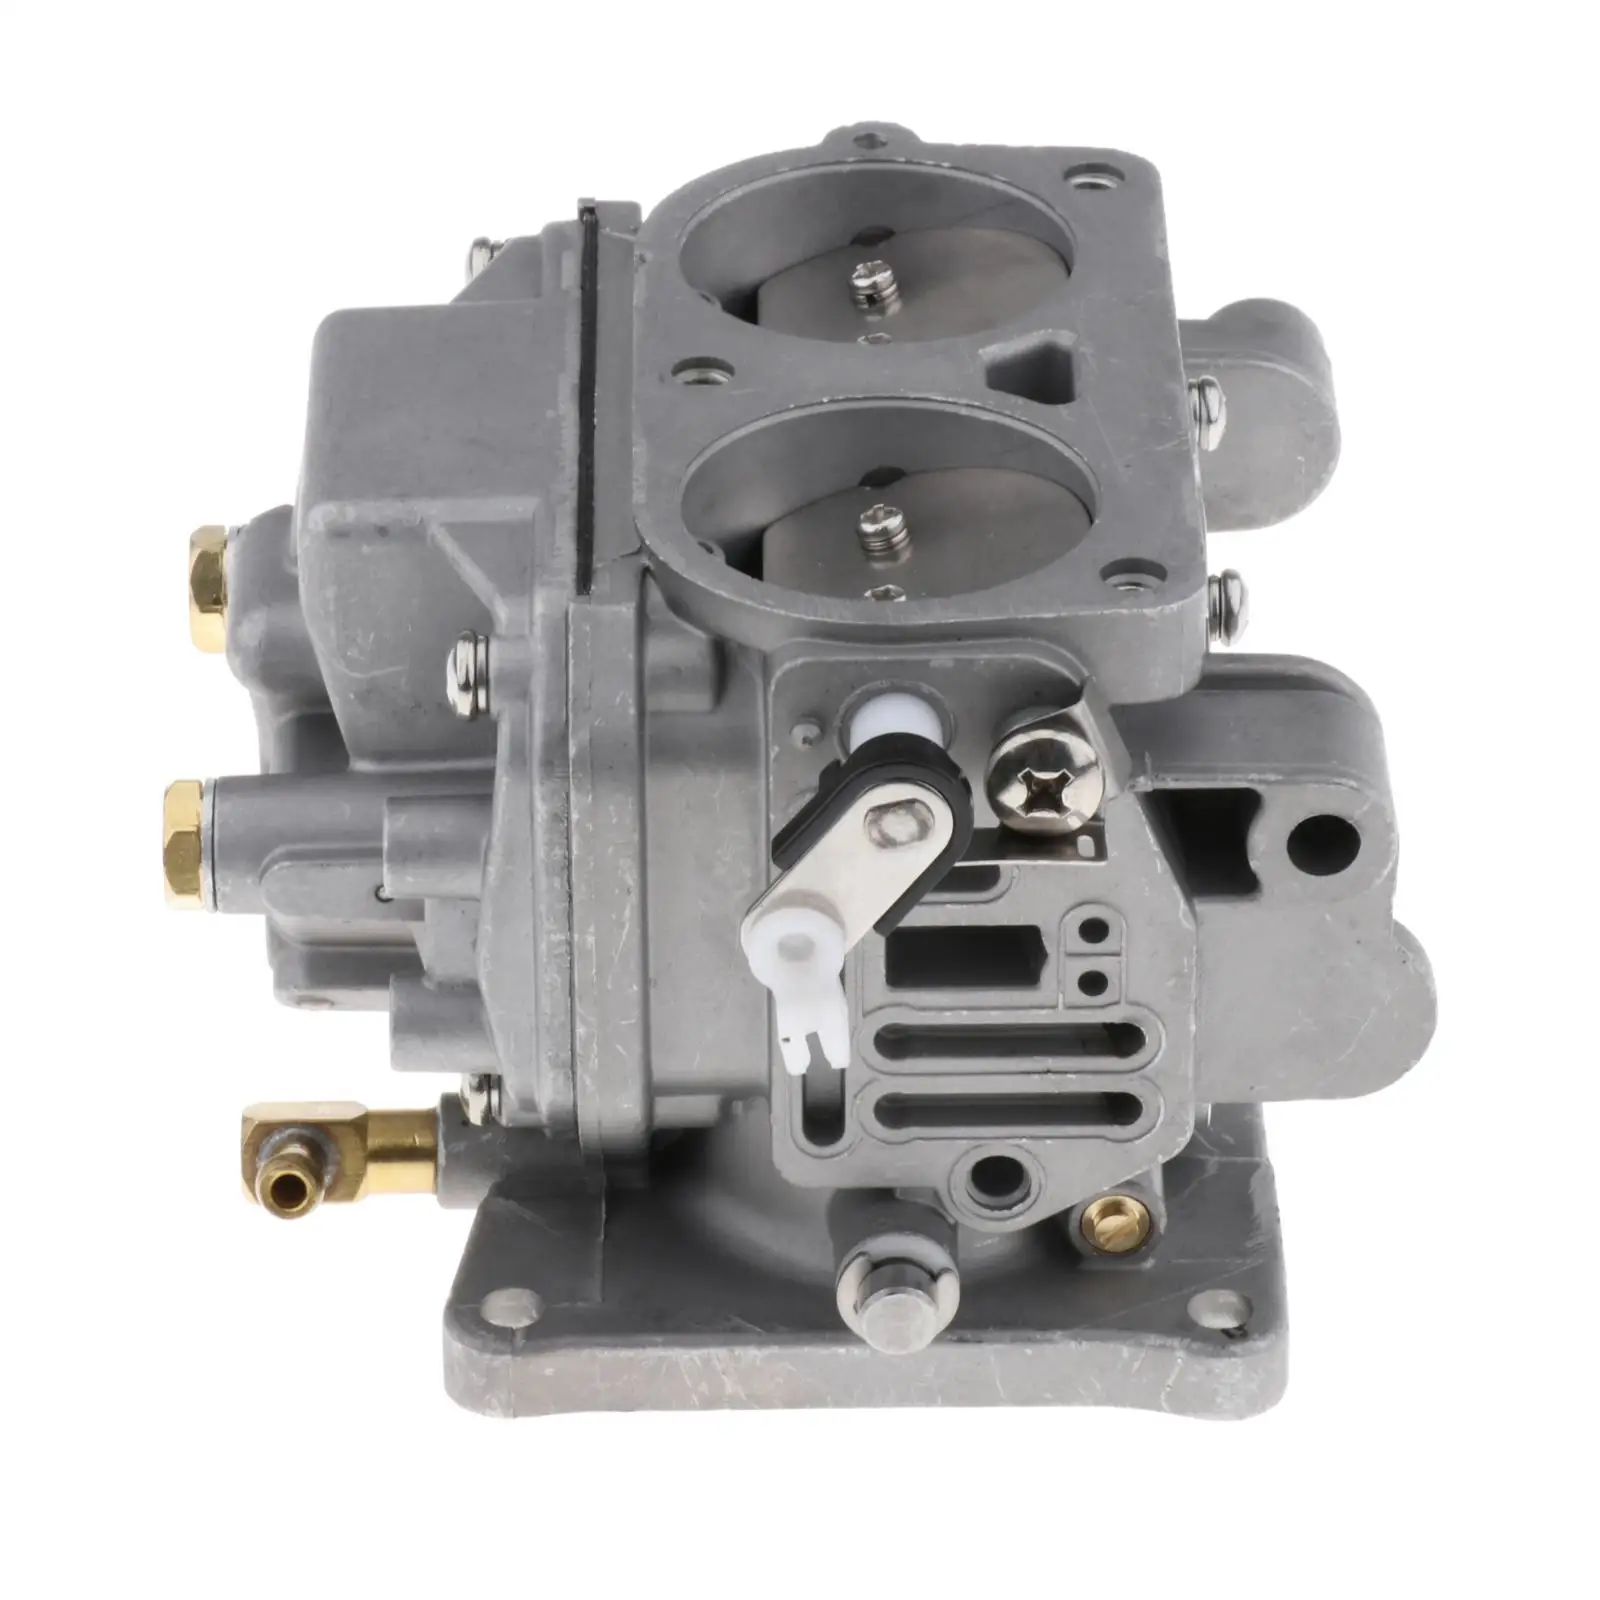 Boat Motor Carburetor Carb Assy For Yamaha 40HP J 1986-1993 For Chinese Parsun T36J T40J 2 Stroke Outboard Engine